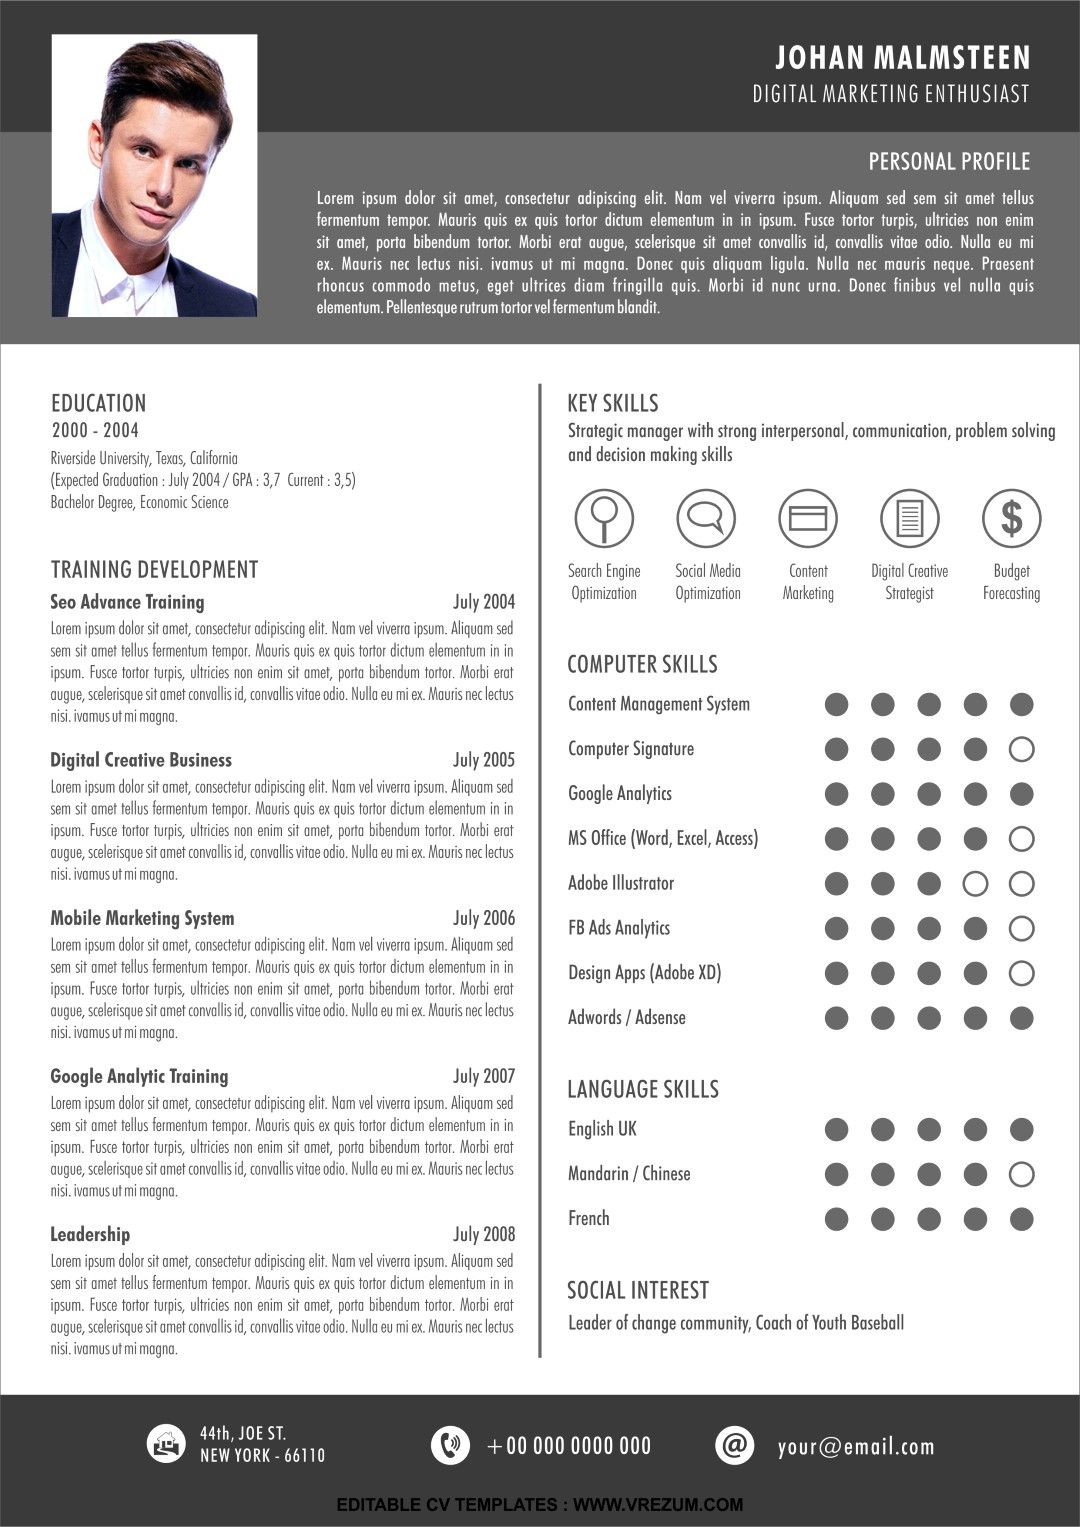 Free Resume Template for New Graduate Editable) – Free Cv Templates for Fresh Graduate Cv Template …